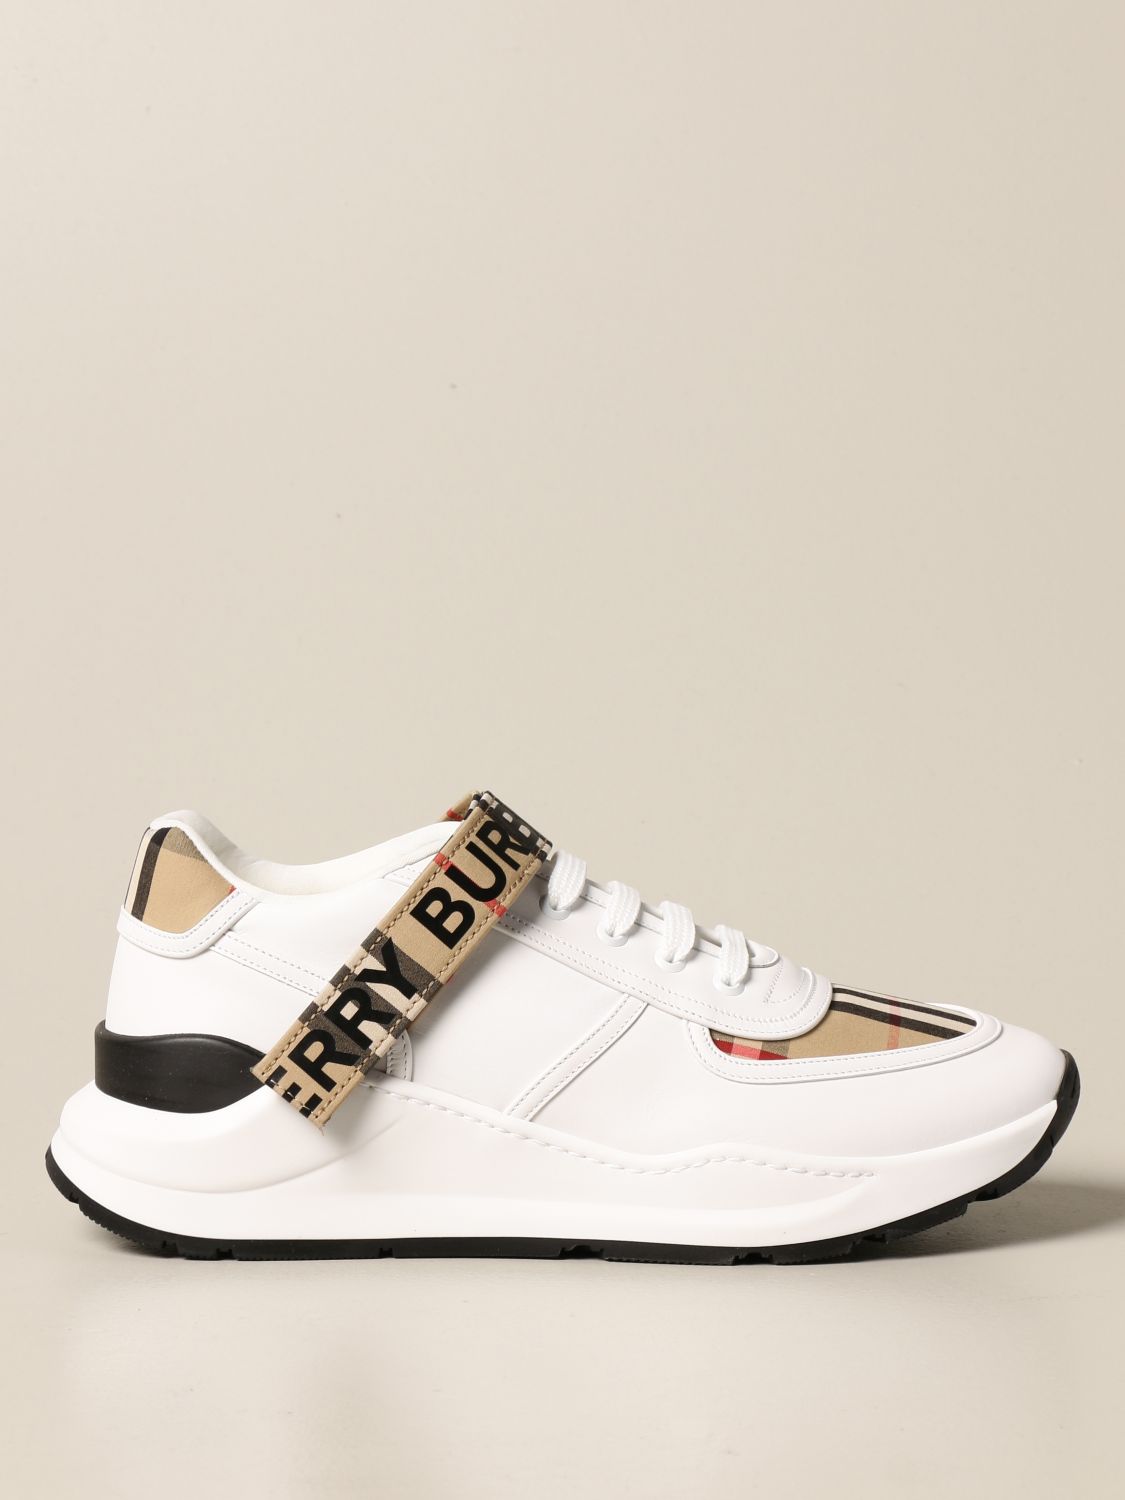 Burberry sneakers in leather with vintage check motif and logo